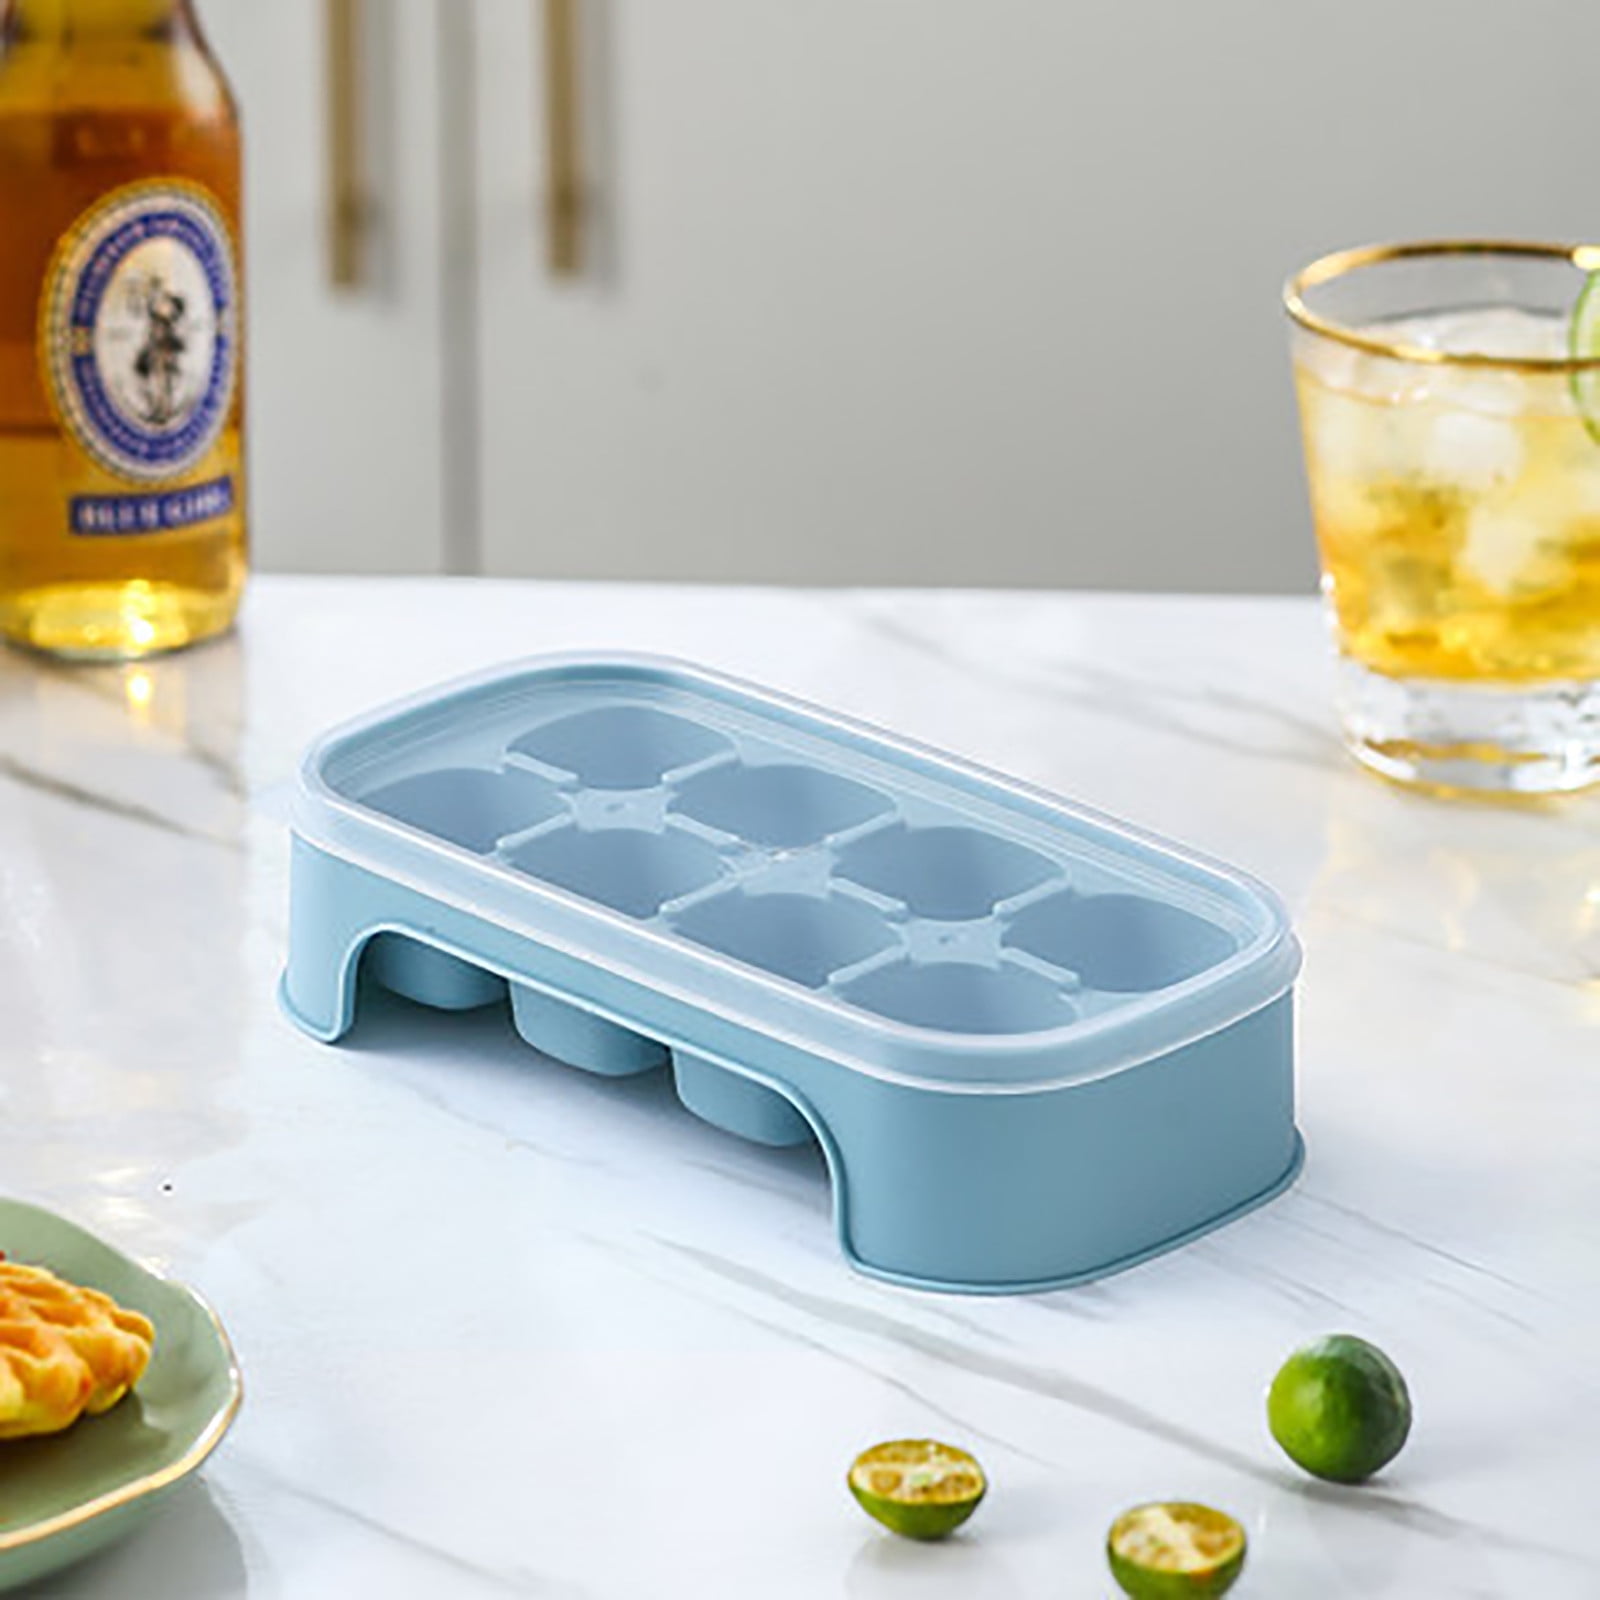 AHEGAS Mini Ice Cubes Maker, Decompress Ice Lattice,Cylinder 3D Silicone Ice Lattice Molding Ice Maker,Holds to 60 Ice Cubes Portable Ice Trays for Freezer